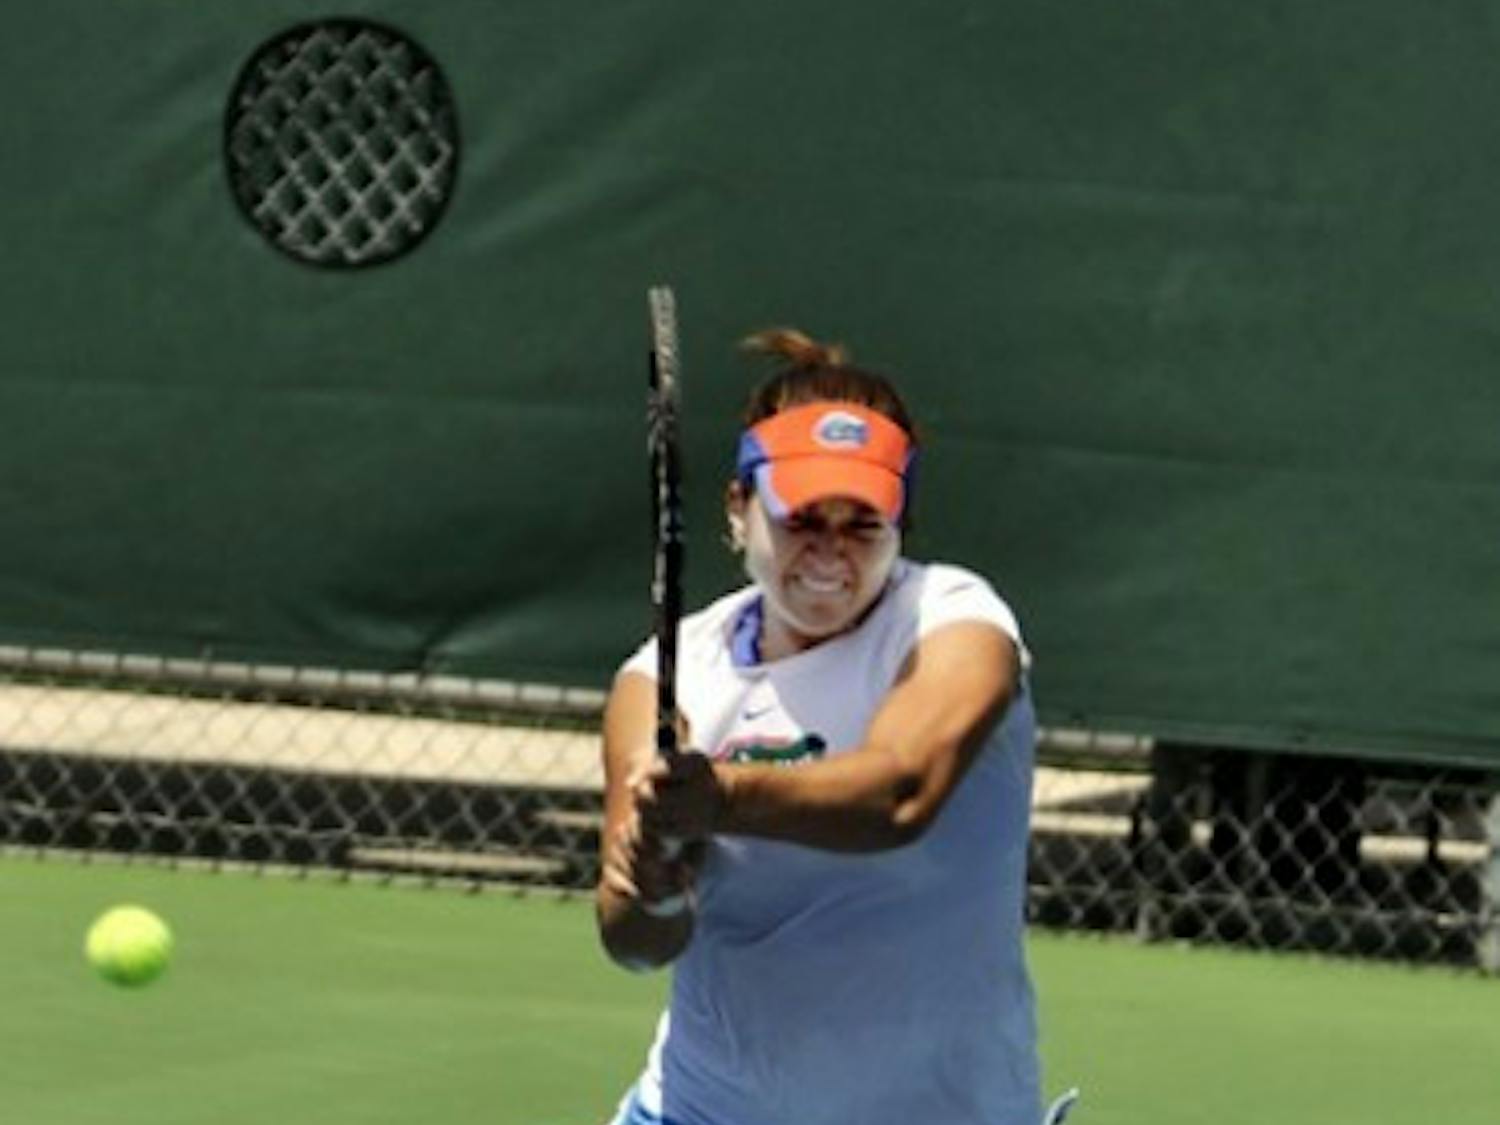 Alexandra Cercone returns a volley. Cercone propelled Florida to a 7-0 victory against South Carolina on Saturday.&nbsp;